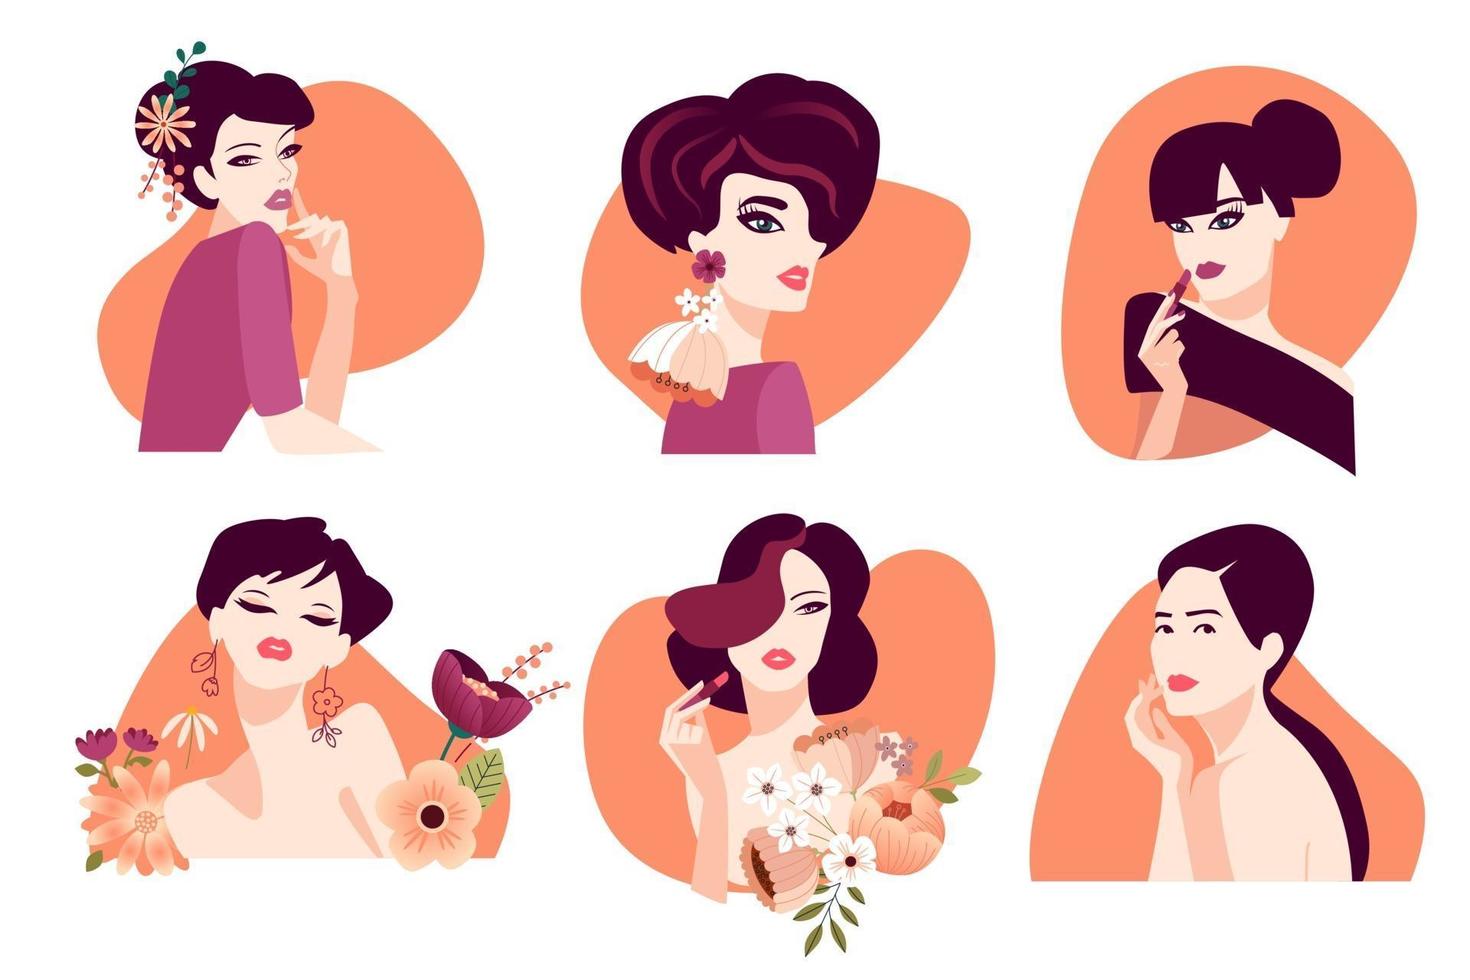 Set of woman illustration concepts for beauty, cosmetics, healthcare, fashion. Flat design vector for graphic and web design, marketing material, product presentation, social media, textile design.